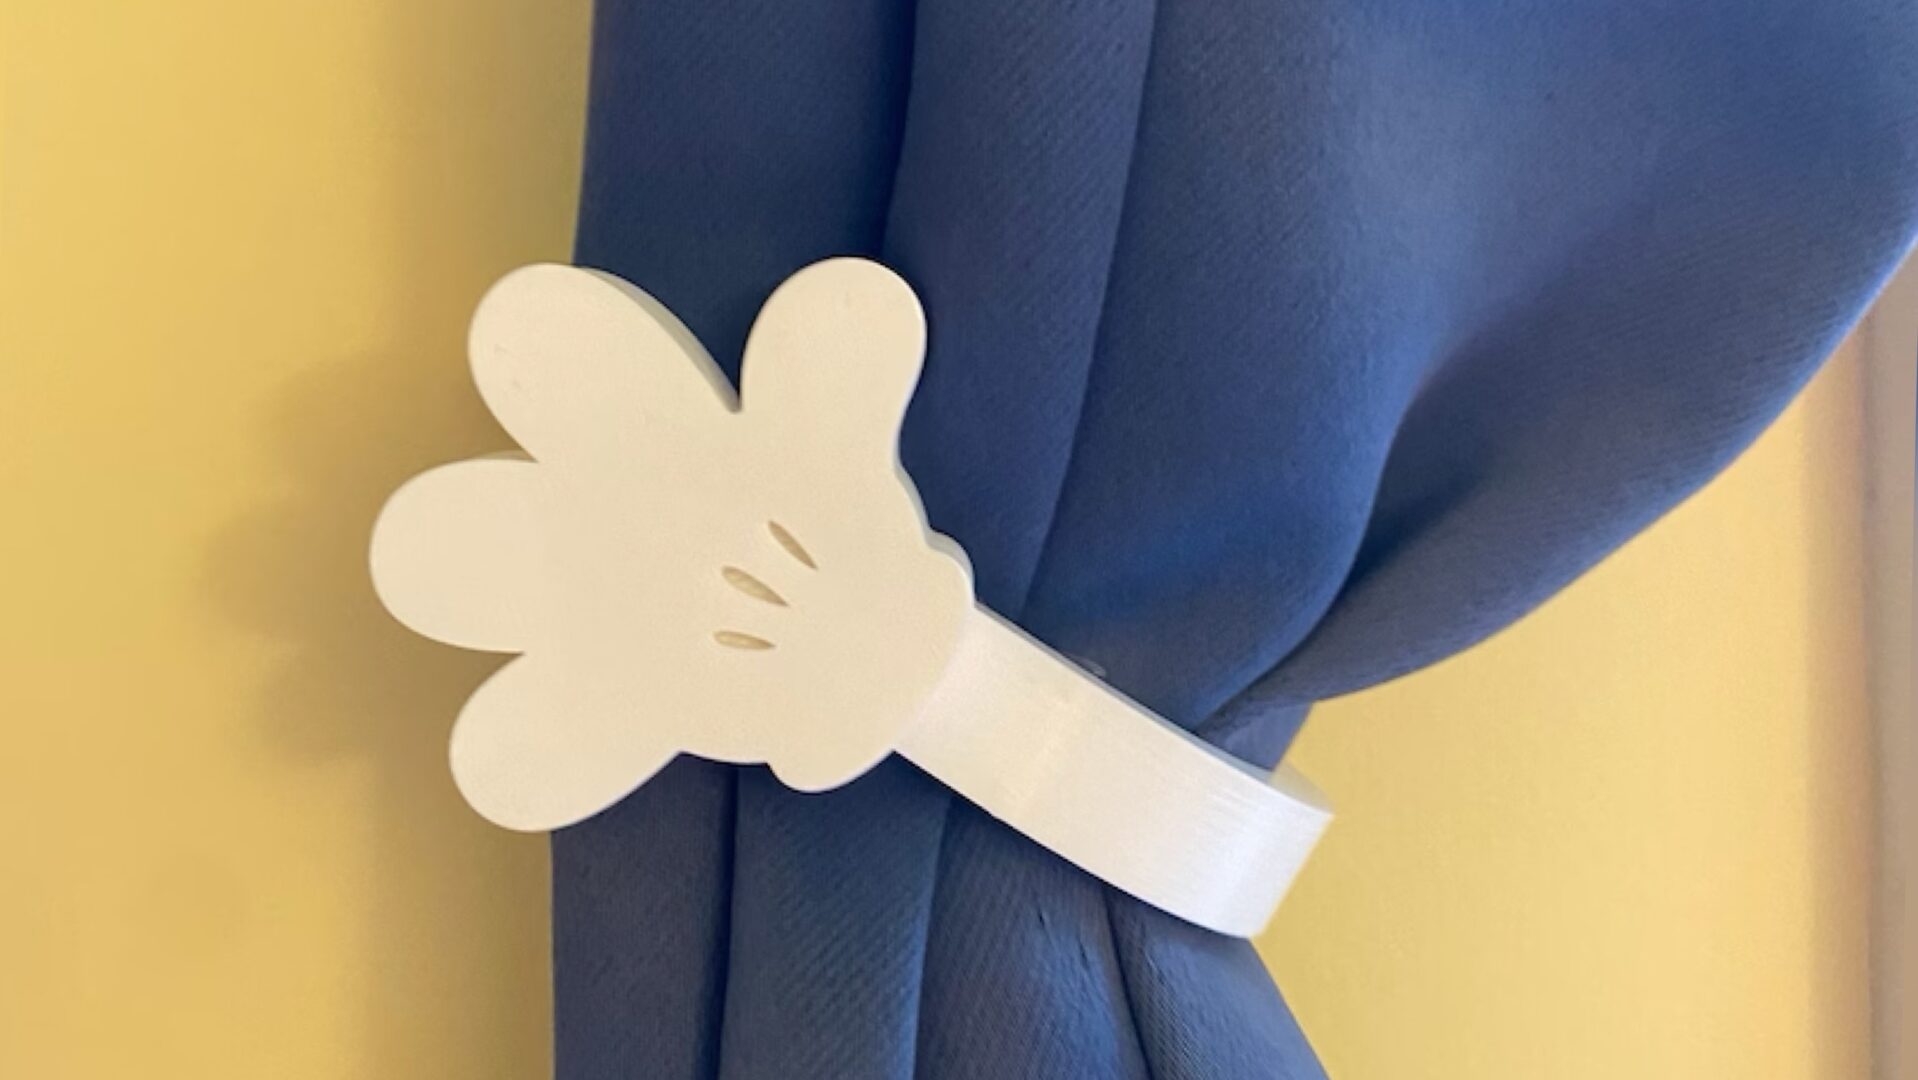 Mickey Glove Curtain Hook To Add Extra Magic To Your Home!